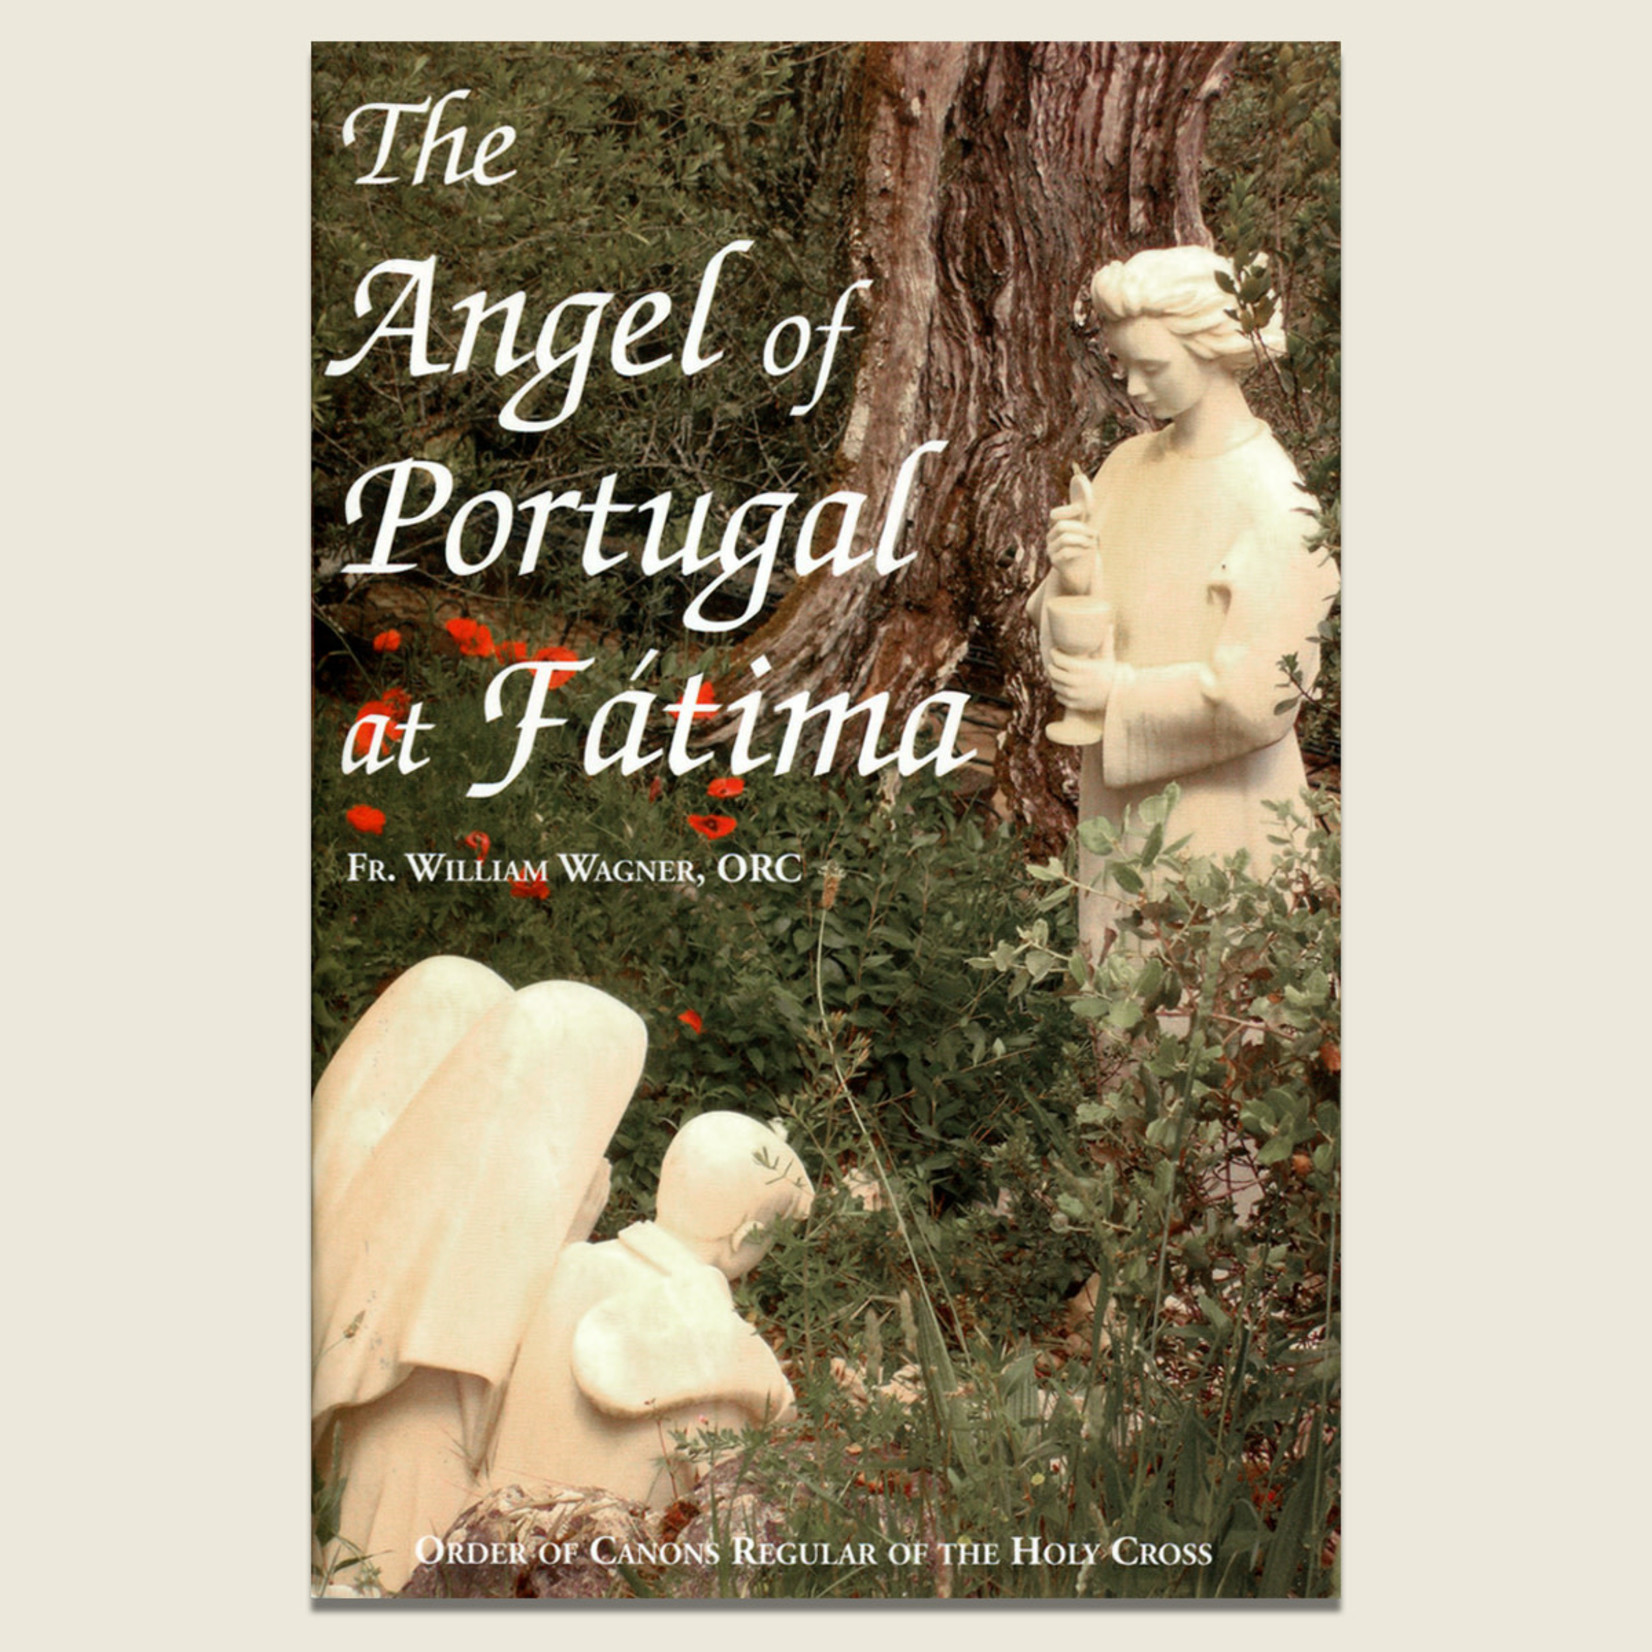 AP-2016 - THE ANGEL OF FATIMA AT PORTUGAL